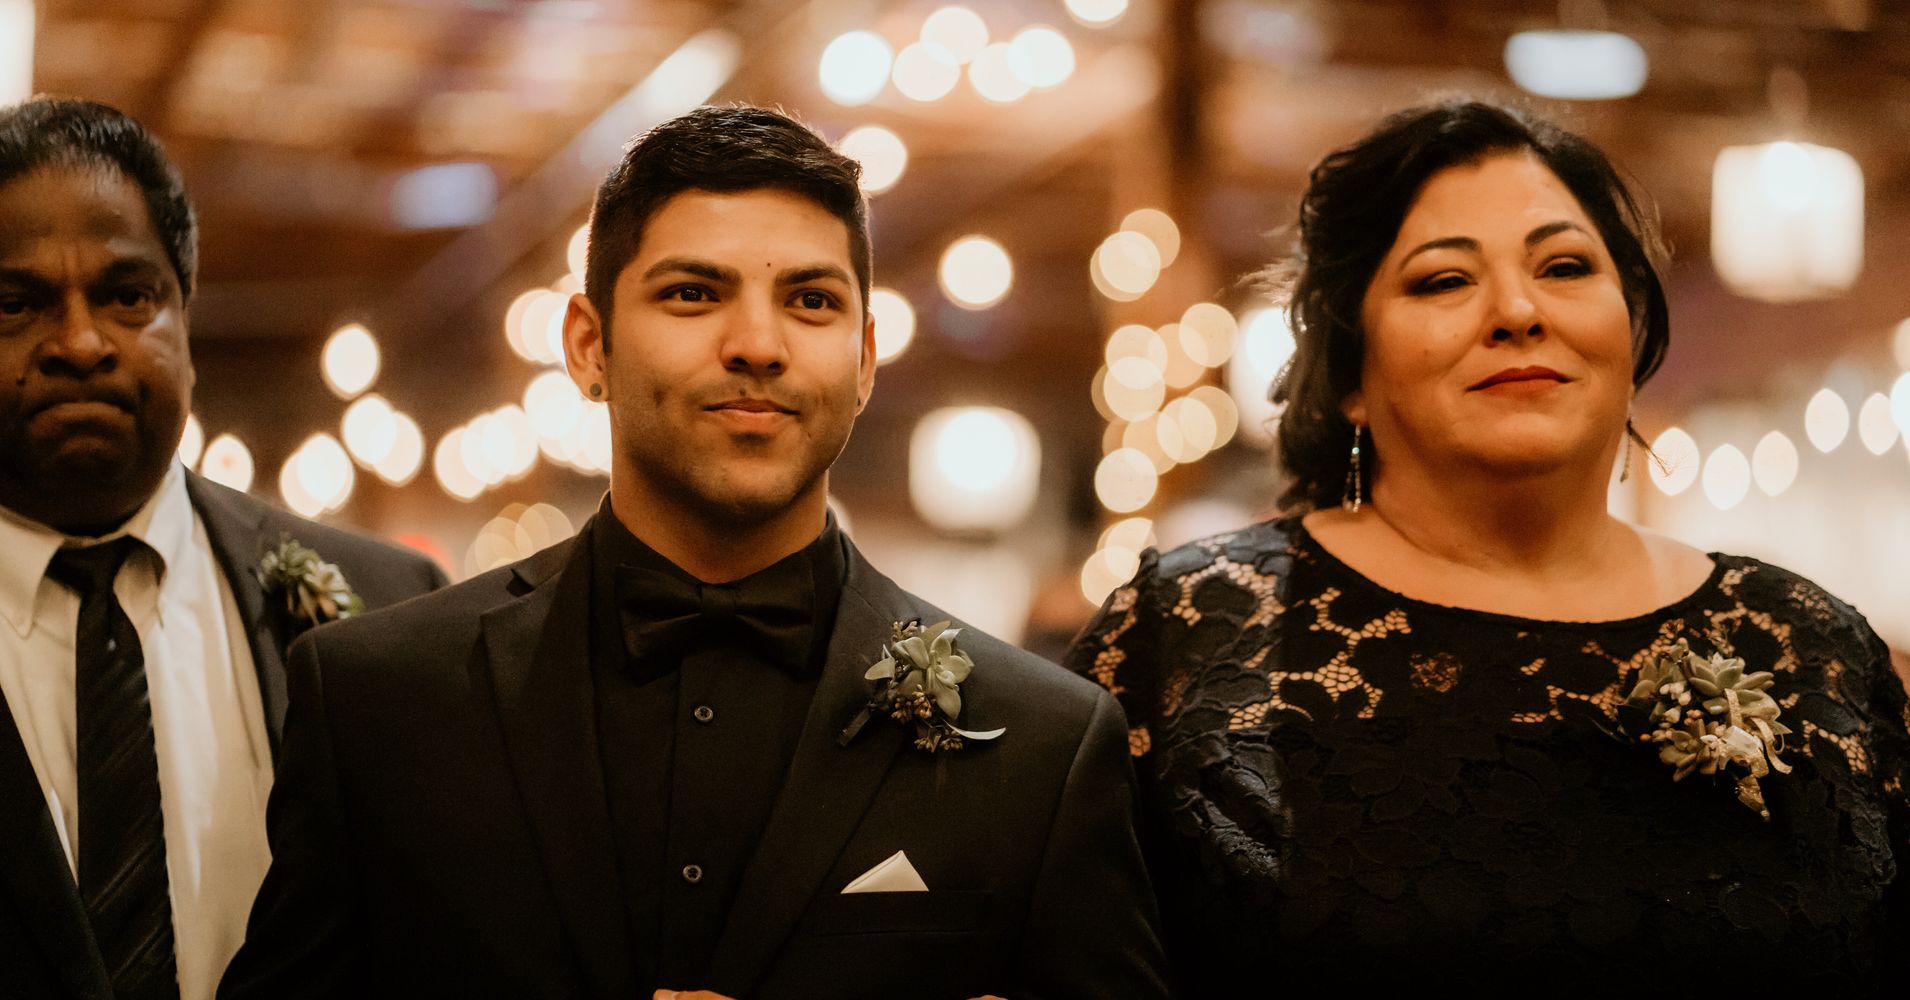 This Bisexual Man Gave His Mom The Surprise Of Her Life On His Wedding